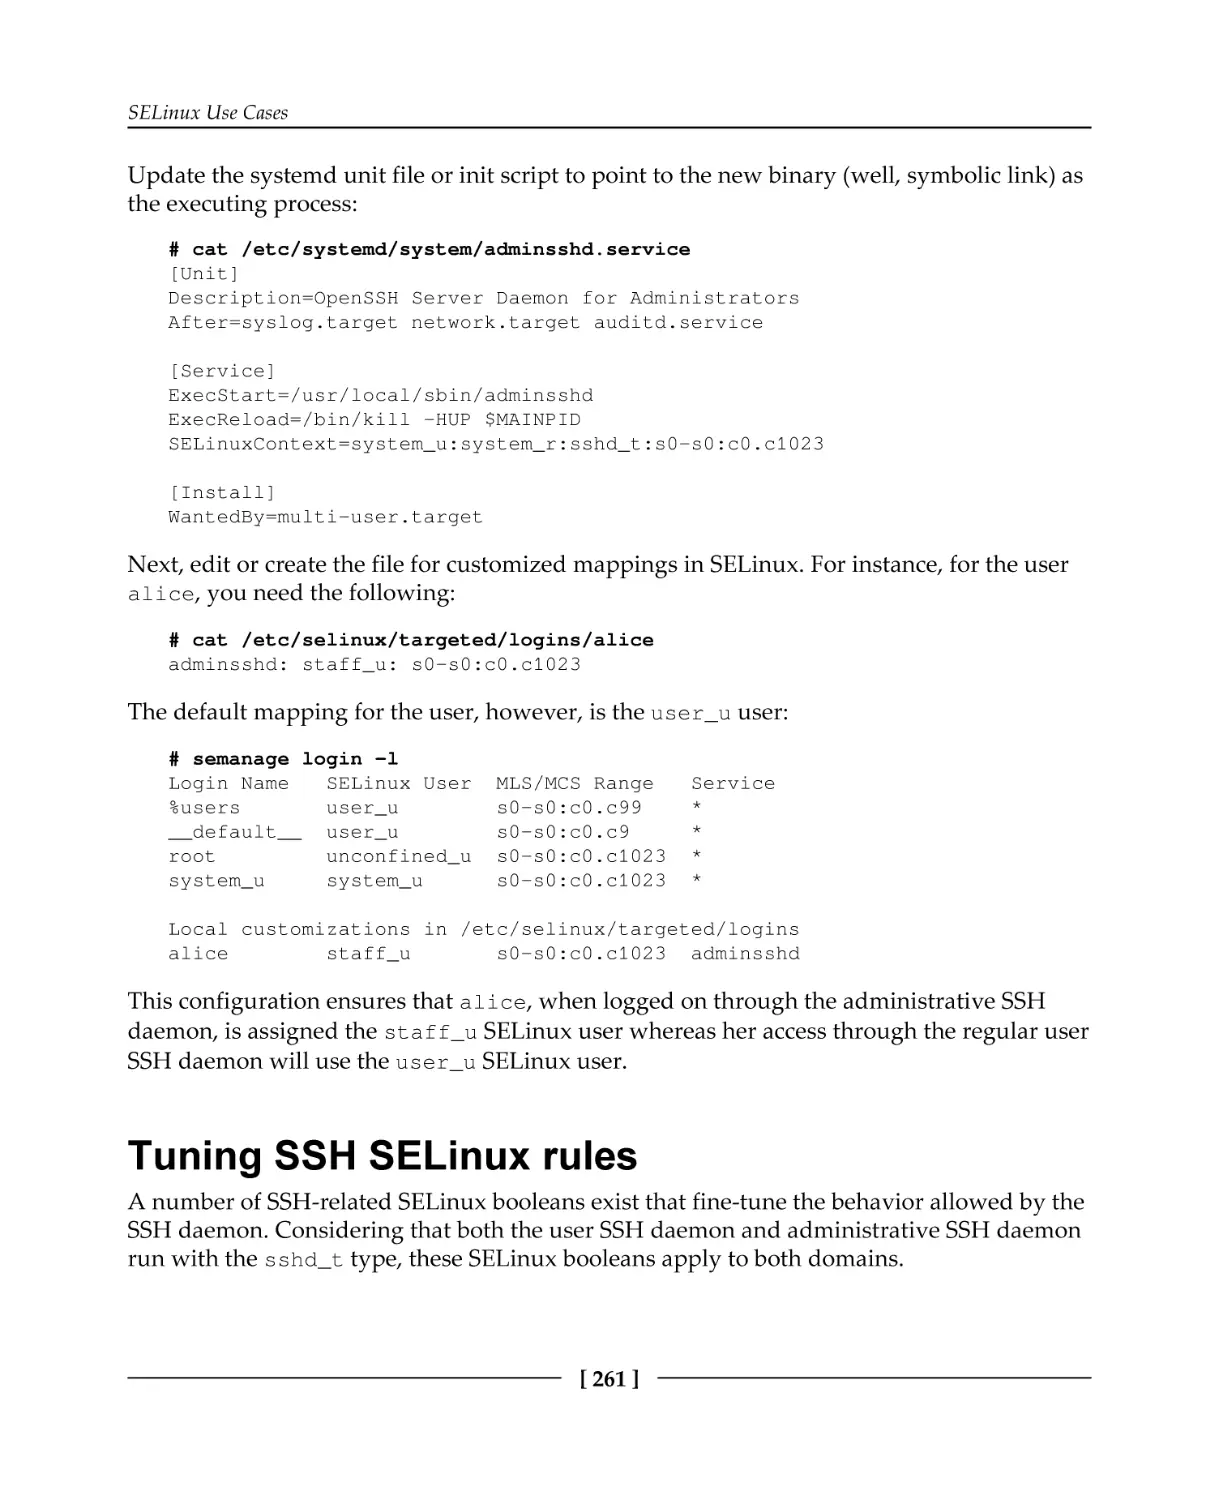 Tuning SSH SELinux rules